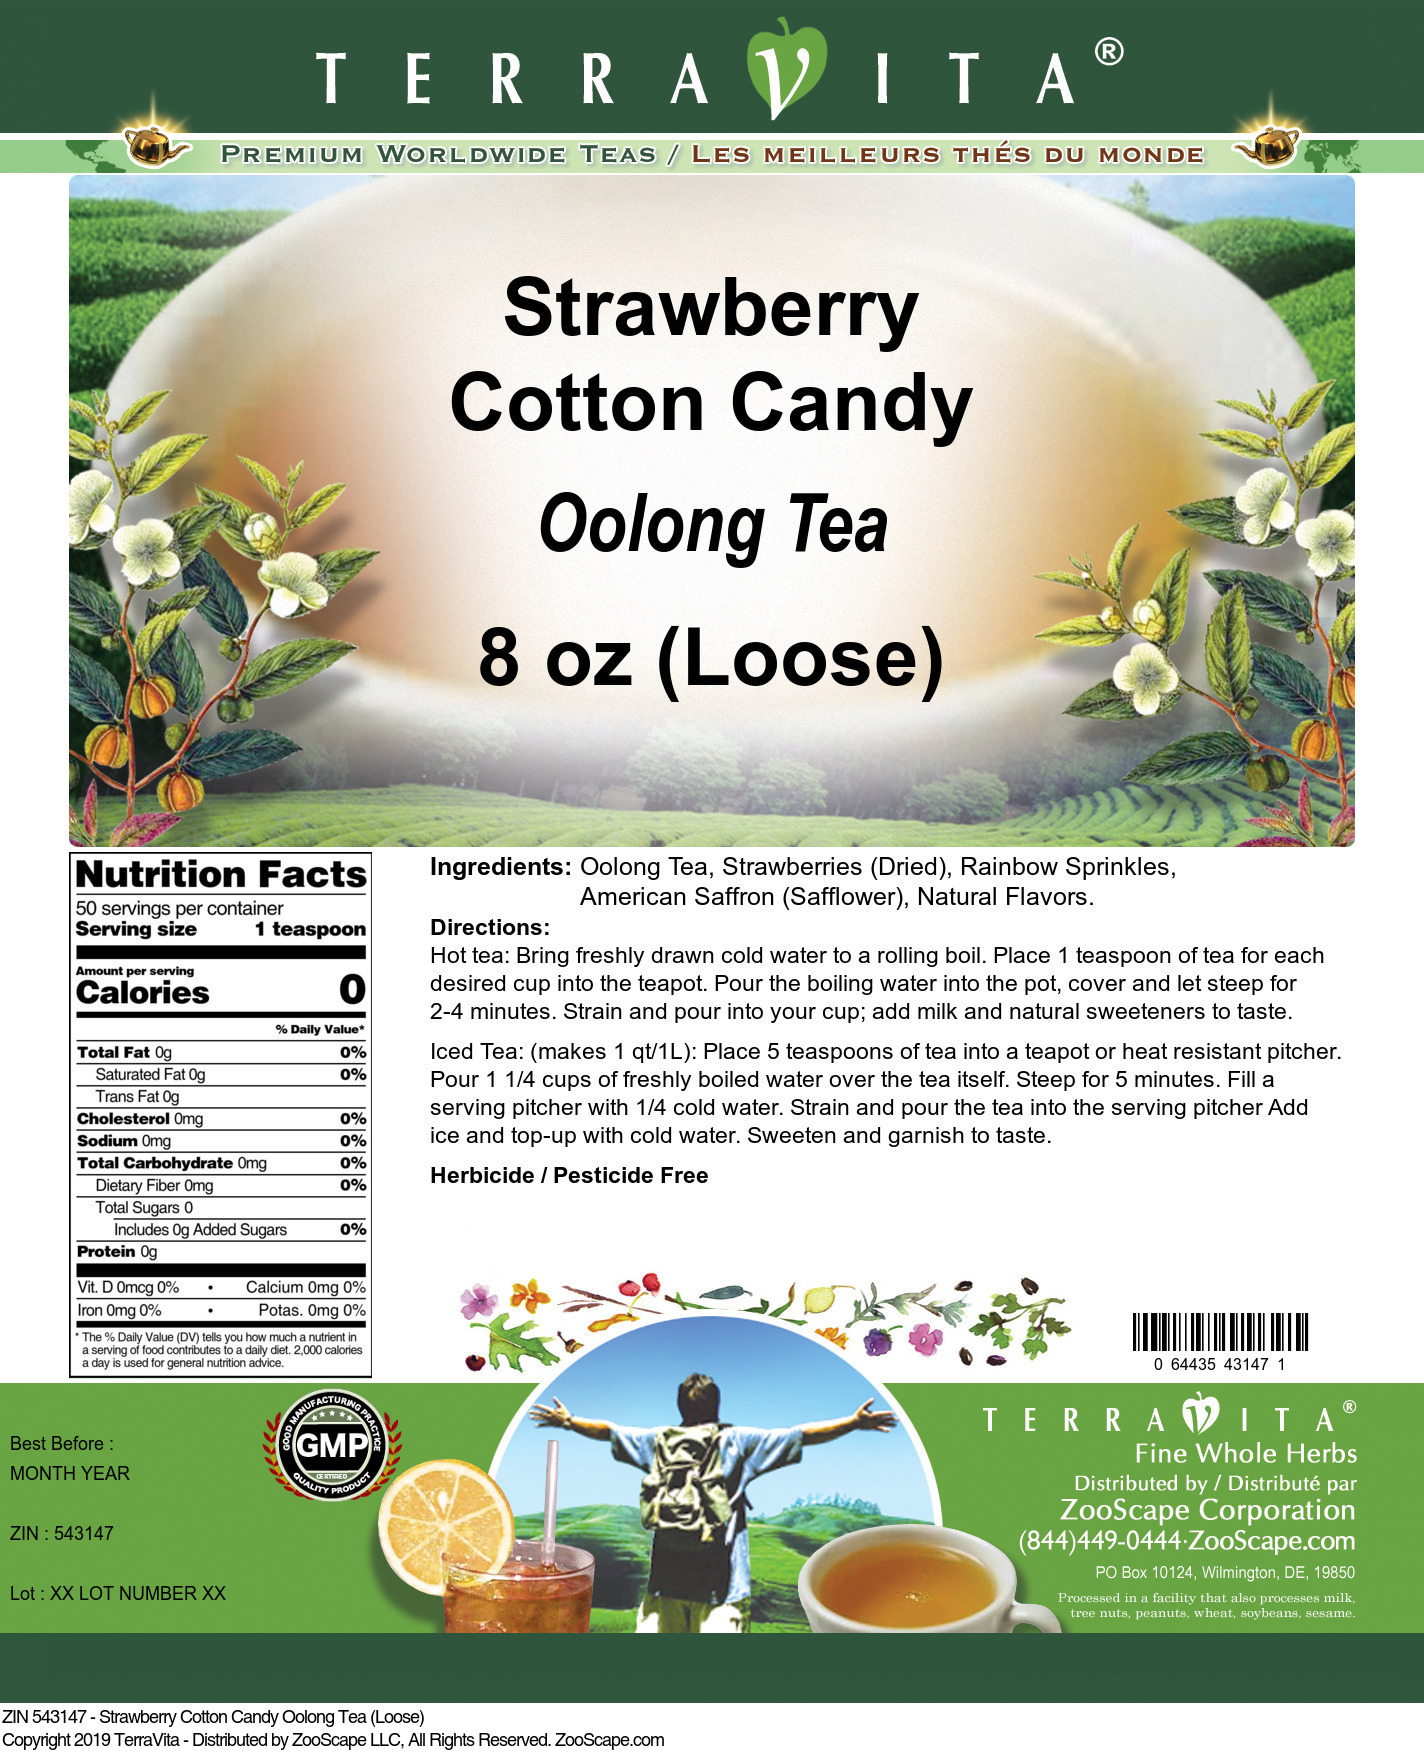 Strawberry Cotton Candy Oolong Tea (Loose) - Label